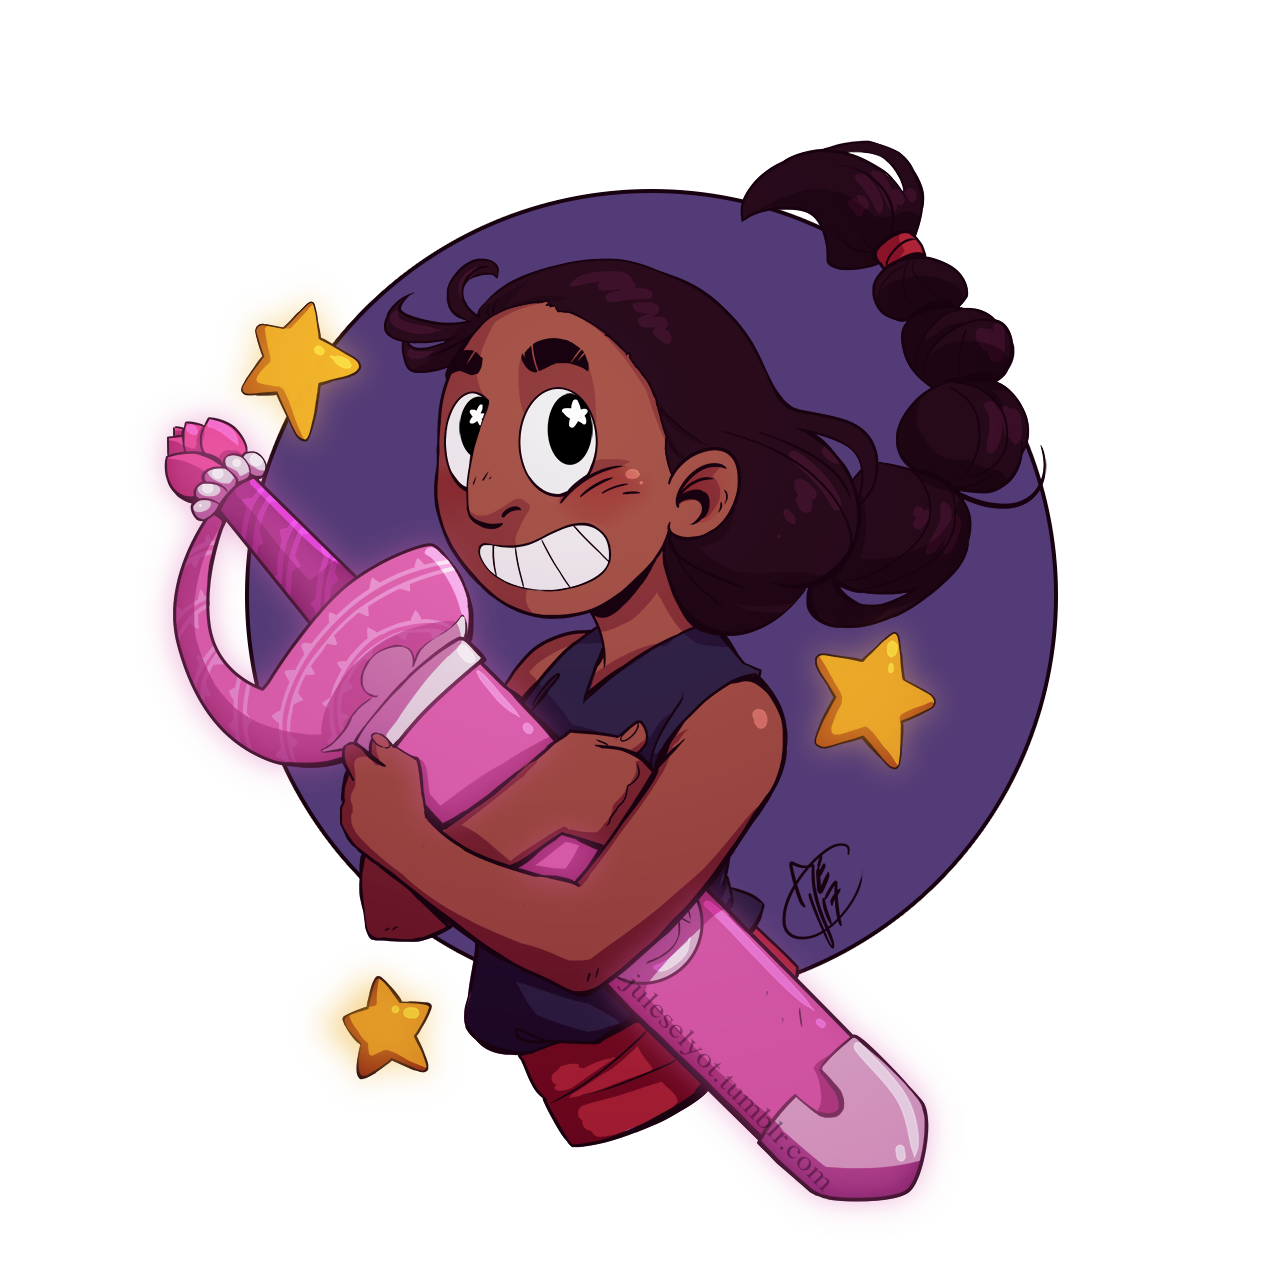 Caught up to Steven Universe super late and had to draw a cute human being ♥